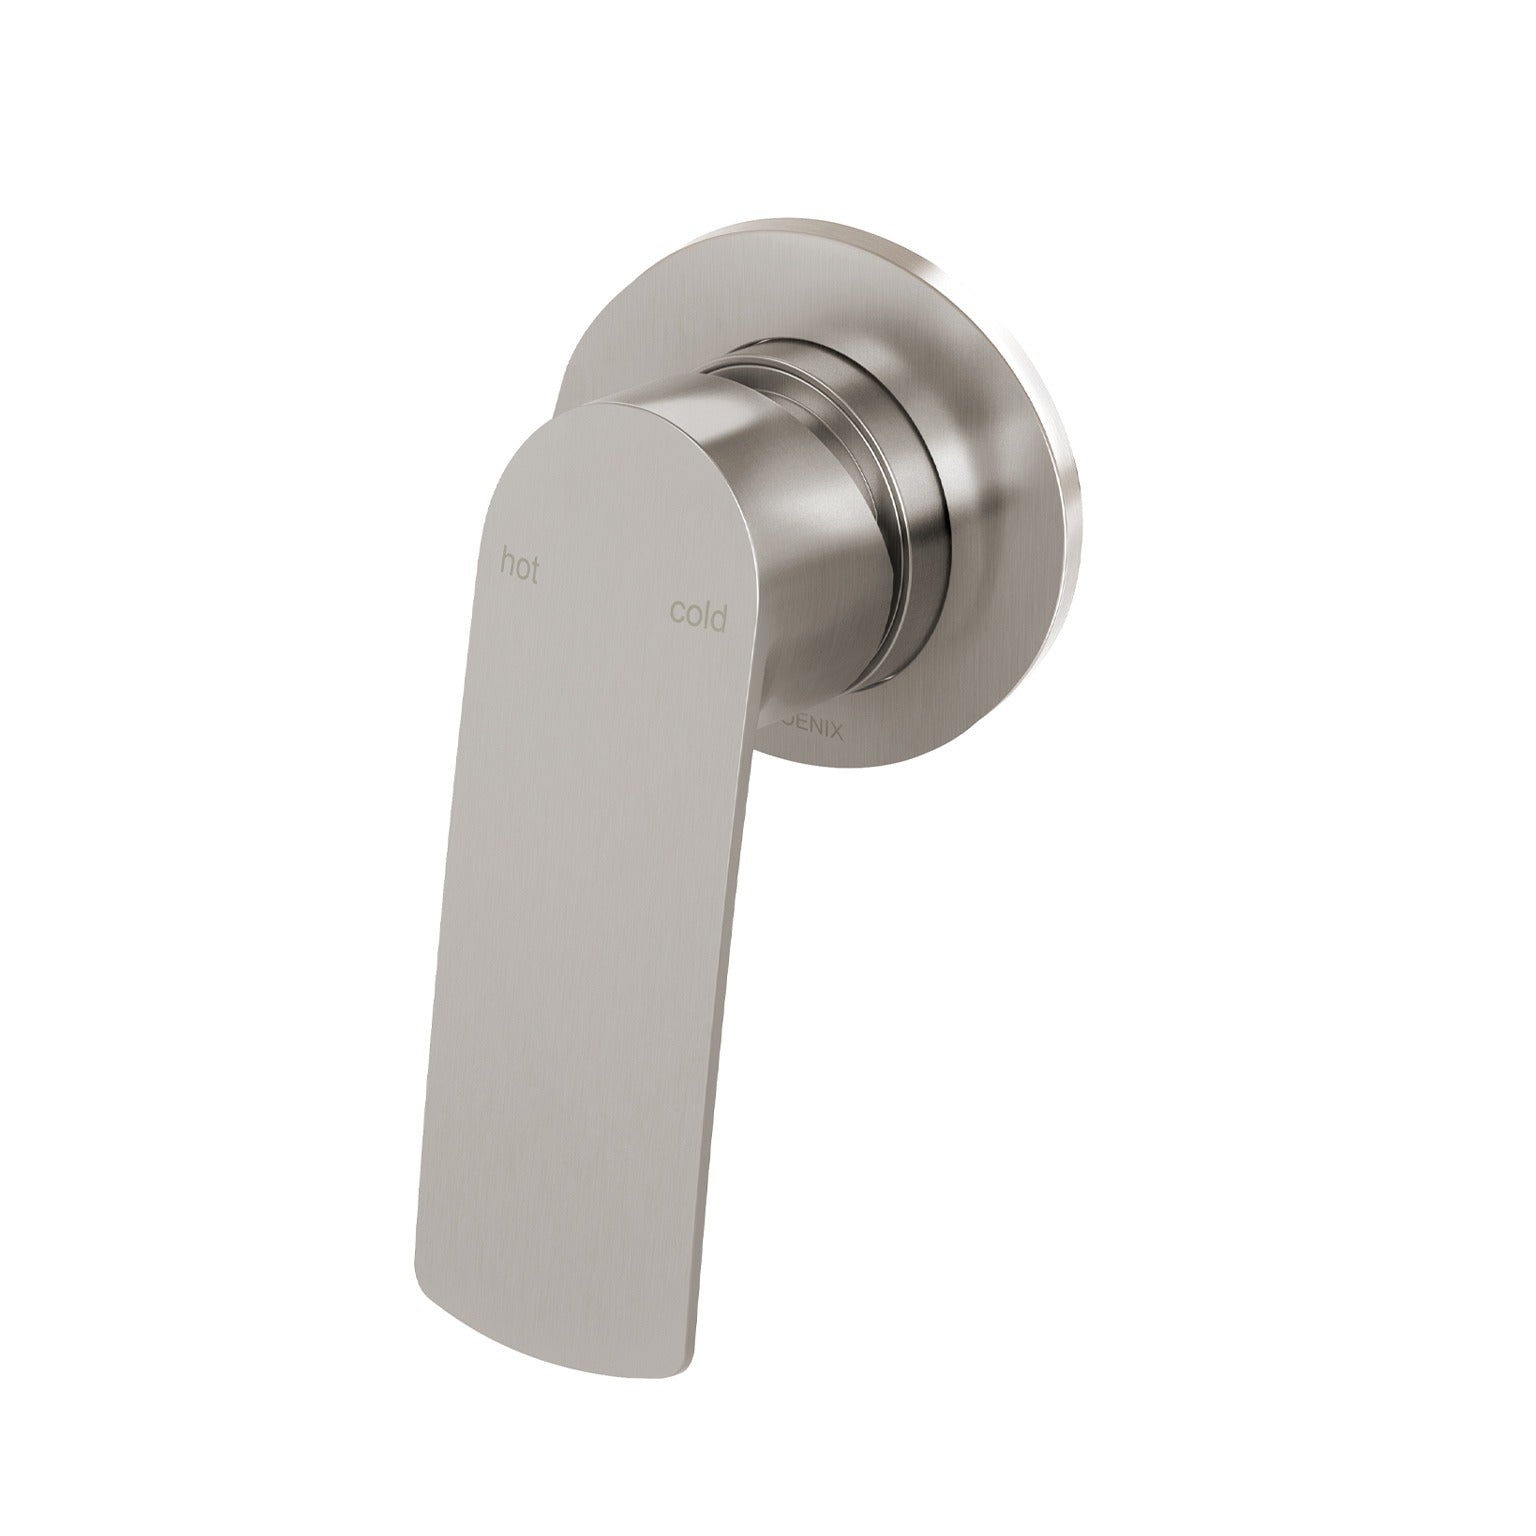 PHOENIX MEKKO SWITCHMIX WALL MIXER W/ ROUND BACKPLATE FIT-OFF AND ROUGH-IN KIT BRUSHED NICKEL